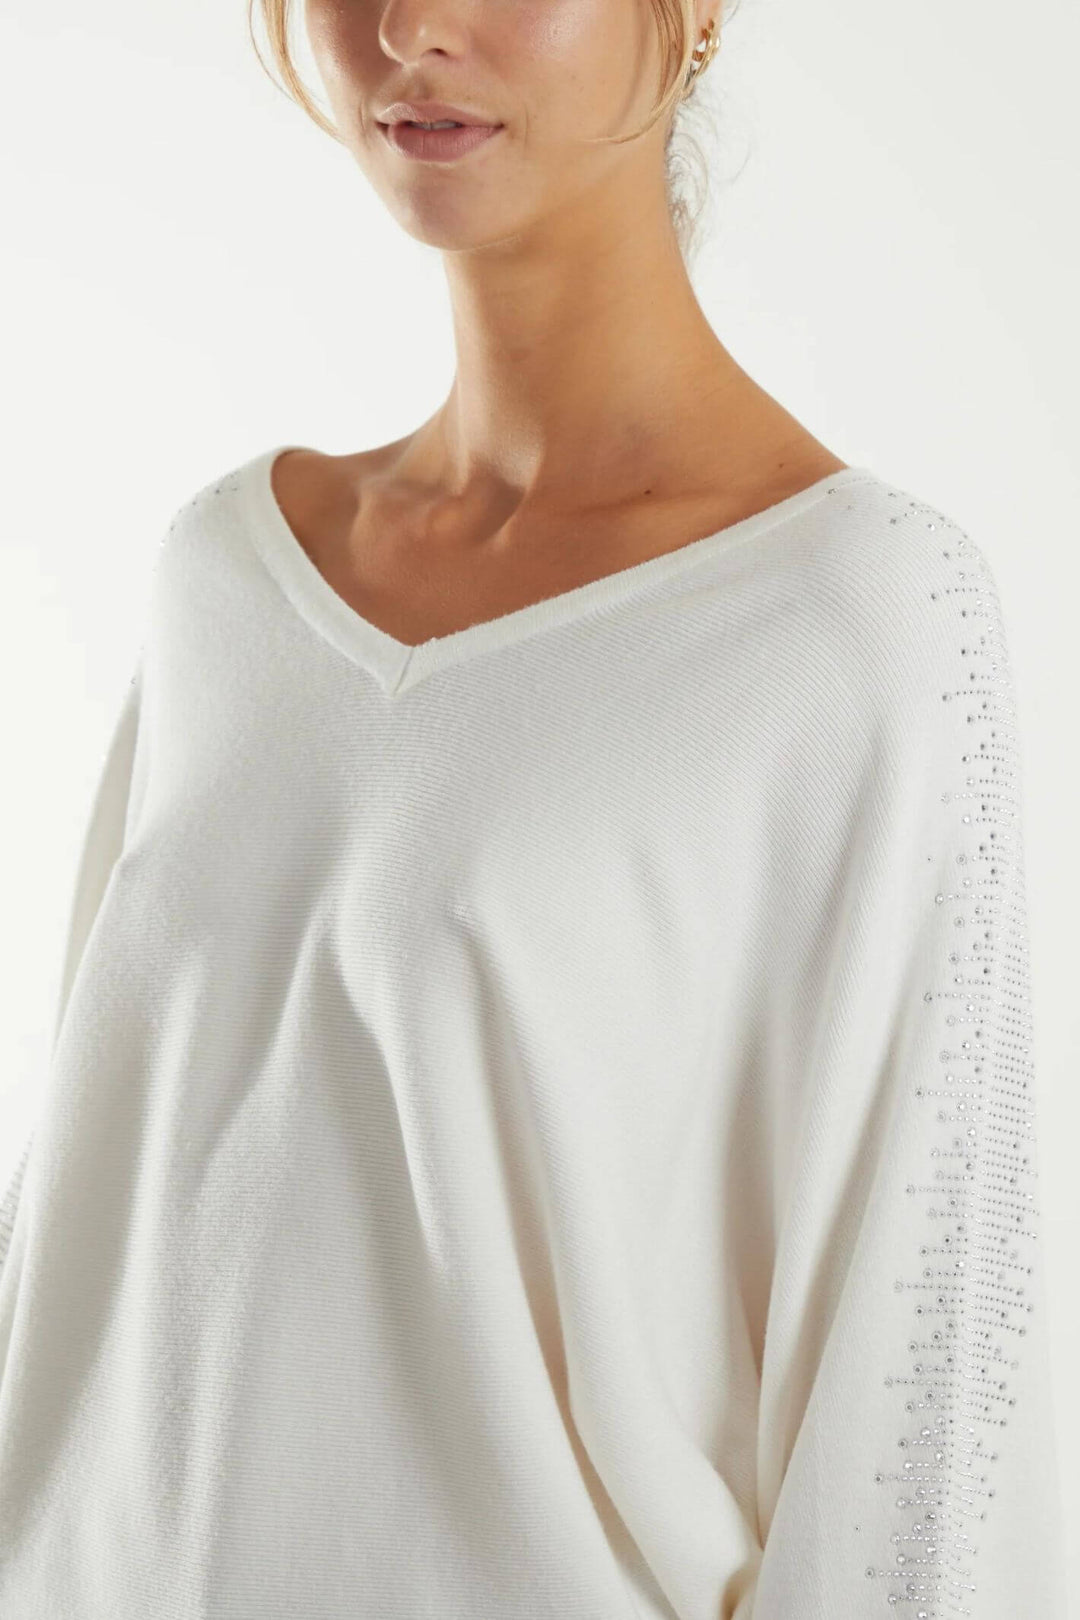 Cream Diamante V-Neck Batwing Knitted Jumper